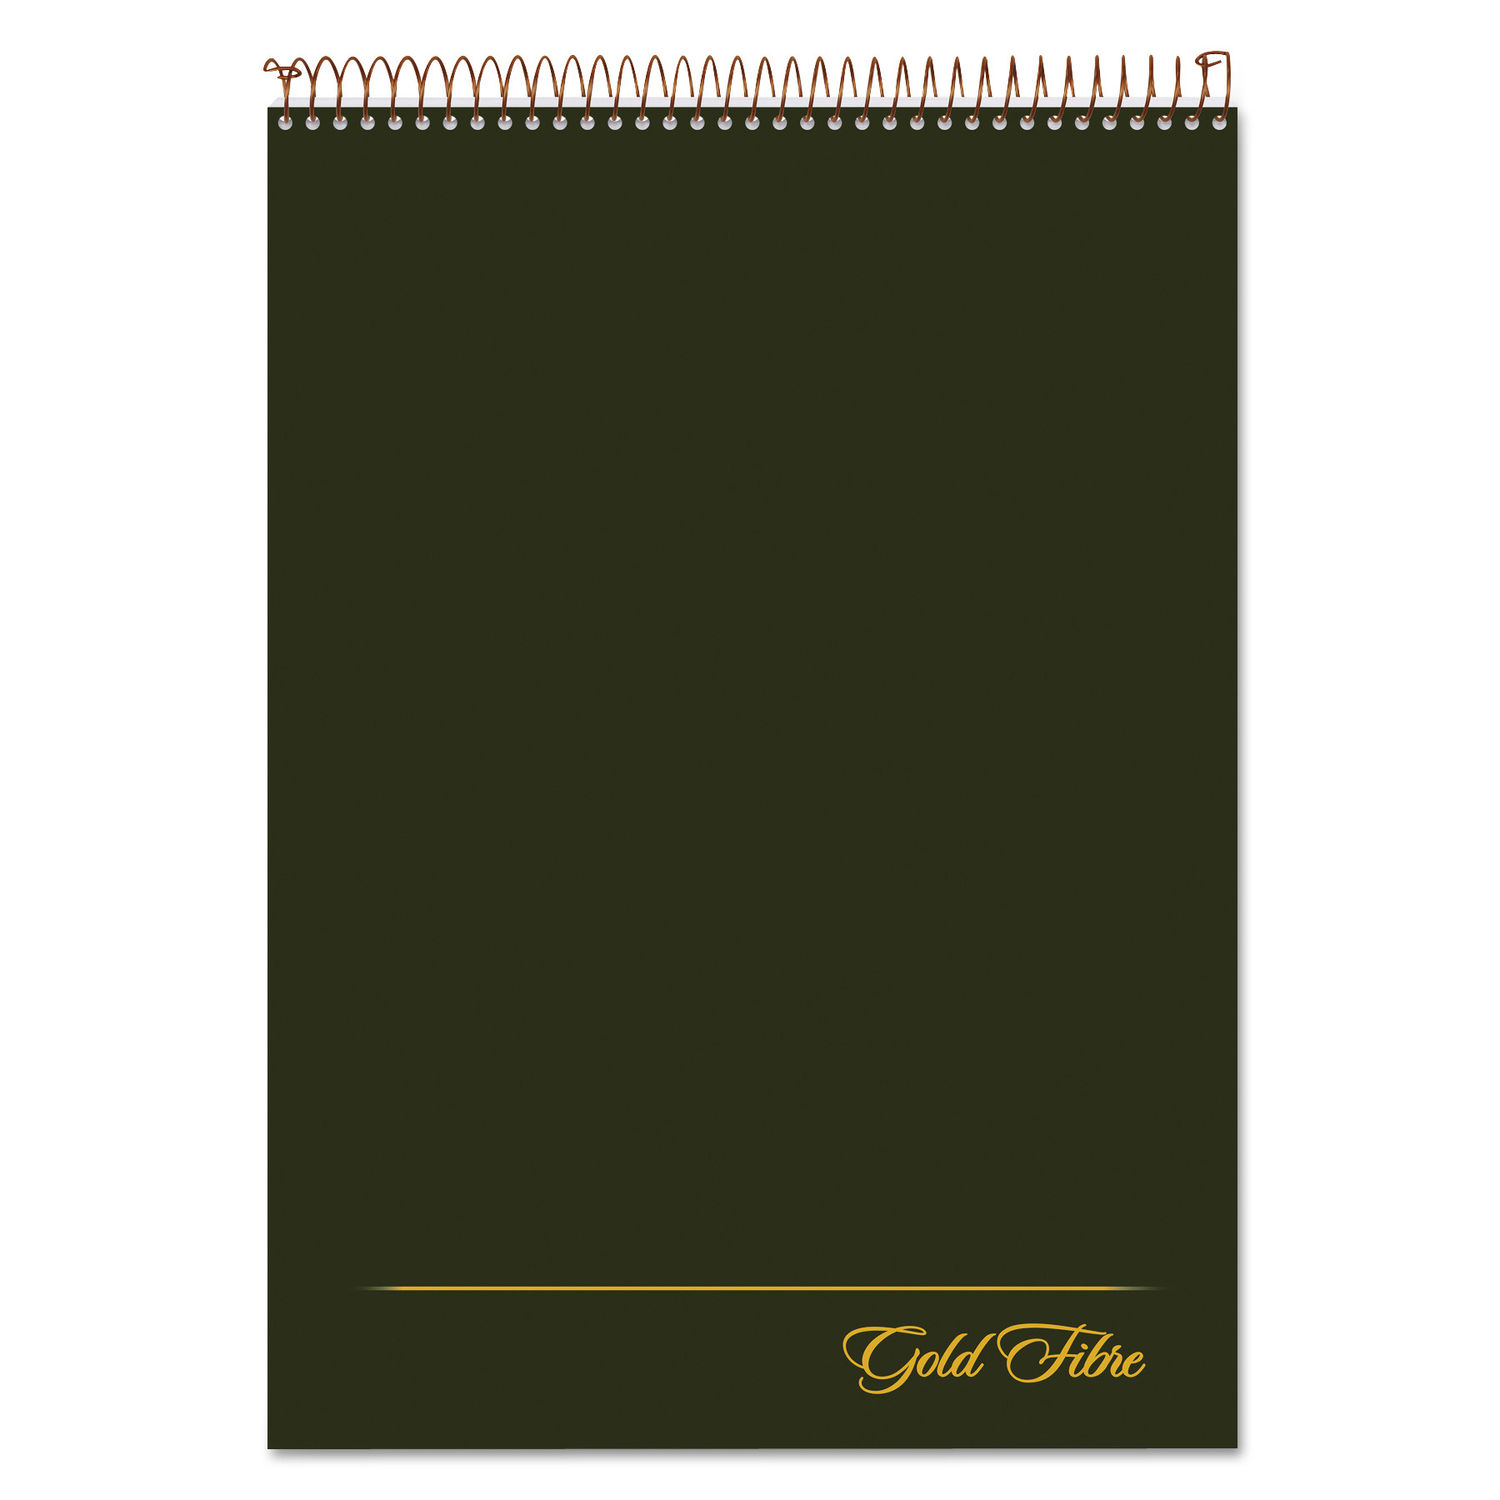 Gold Fibre Wirebound Project Notes Pad Project-Management Format, Green Cover, 70 White 8.5 x 11.75 Sheets